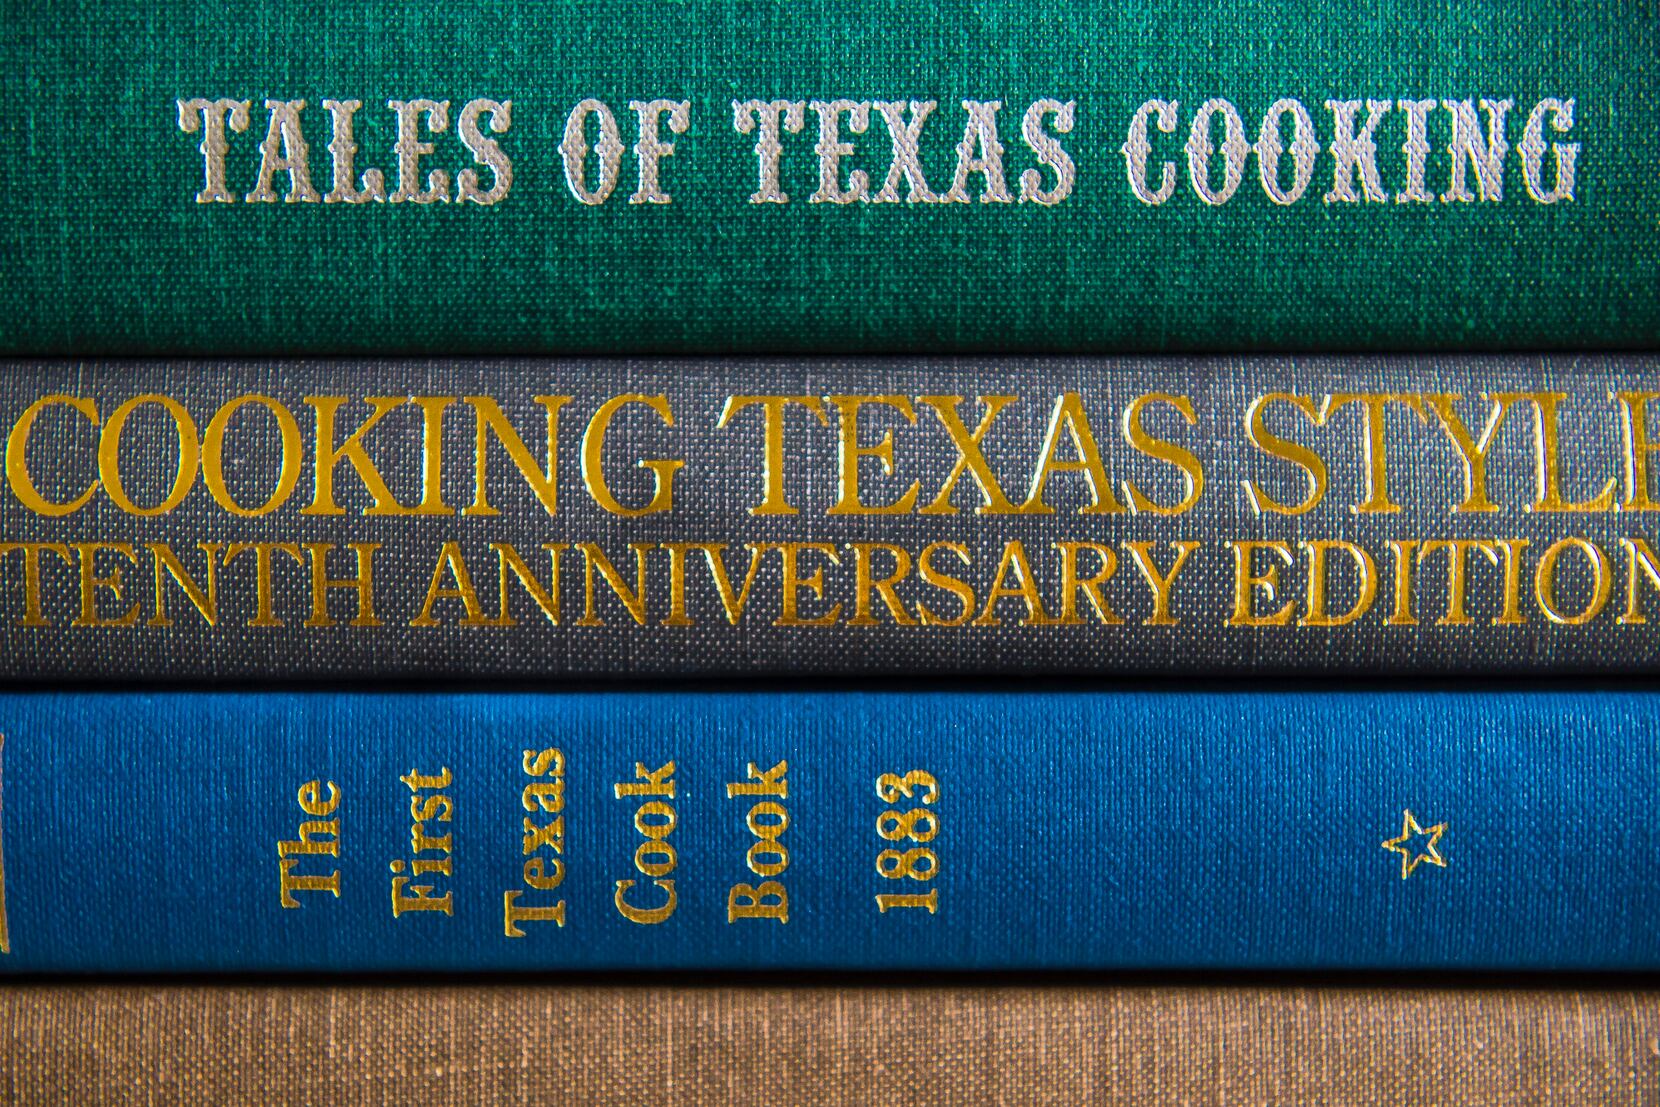 5 vintage Texas cookbooks every Dallas cook needs to know